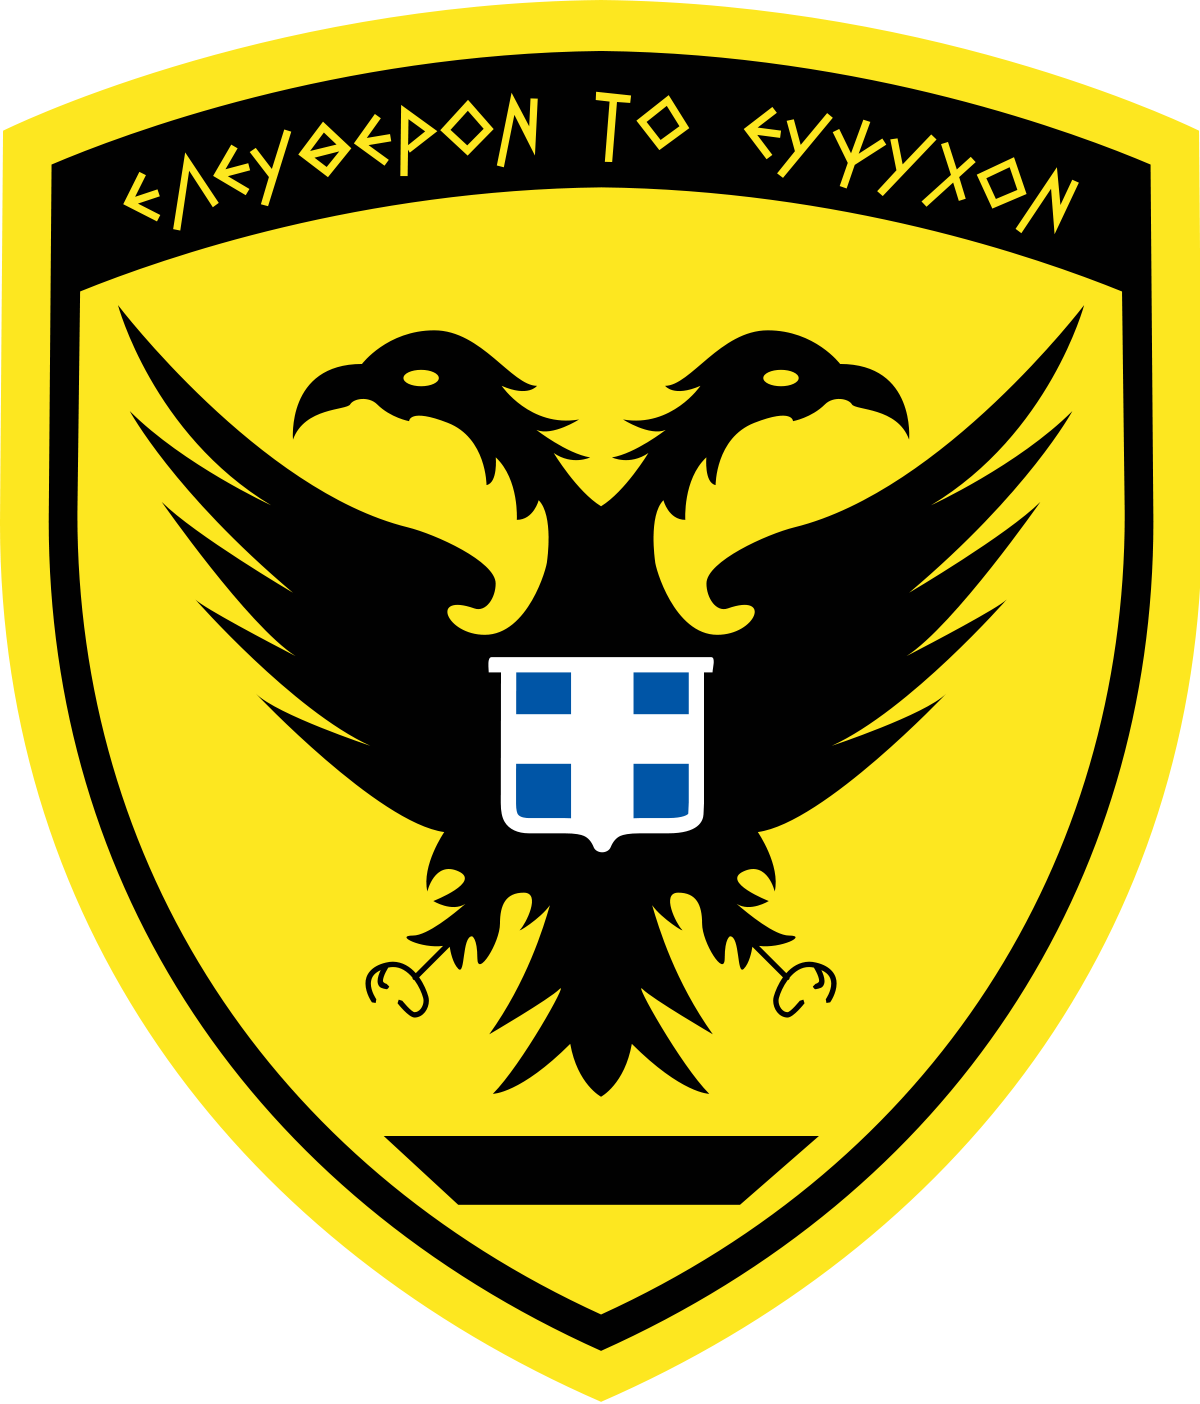 Image Result For Image Of Greek General Showing Insignia - Flag: Hellenic Army Seal (1200x1404)